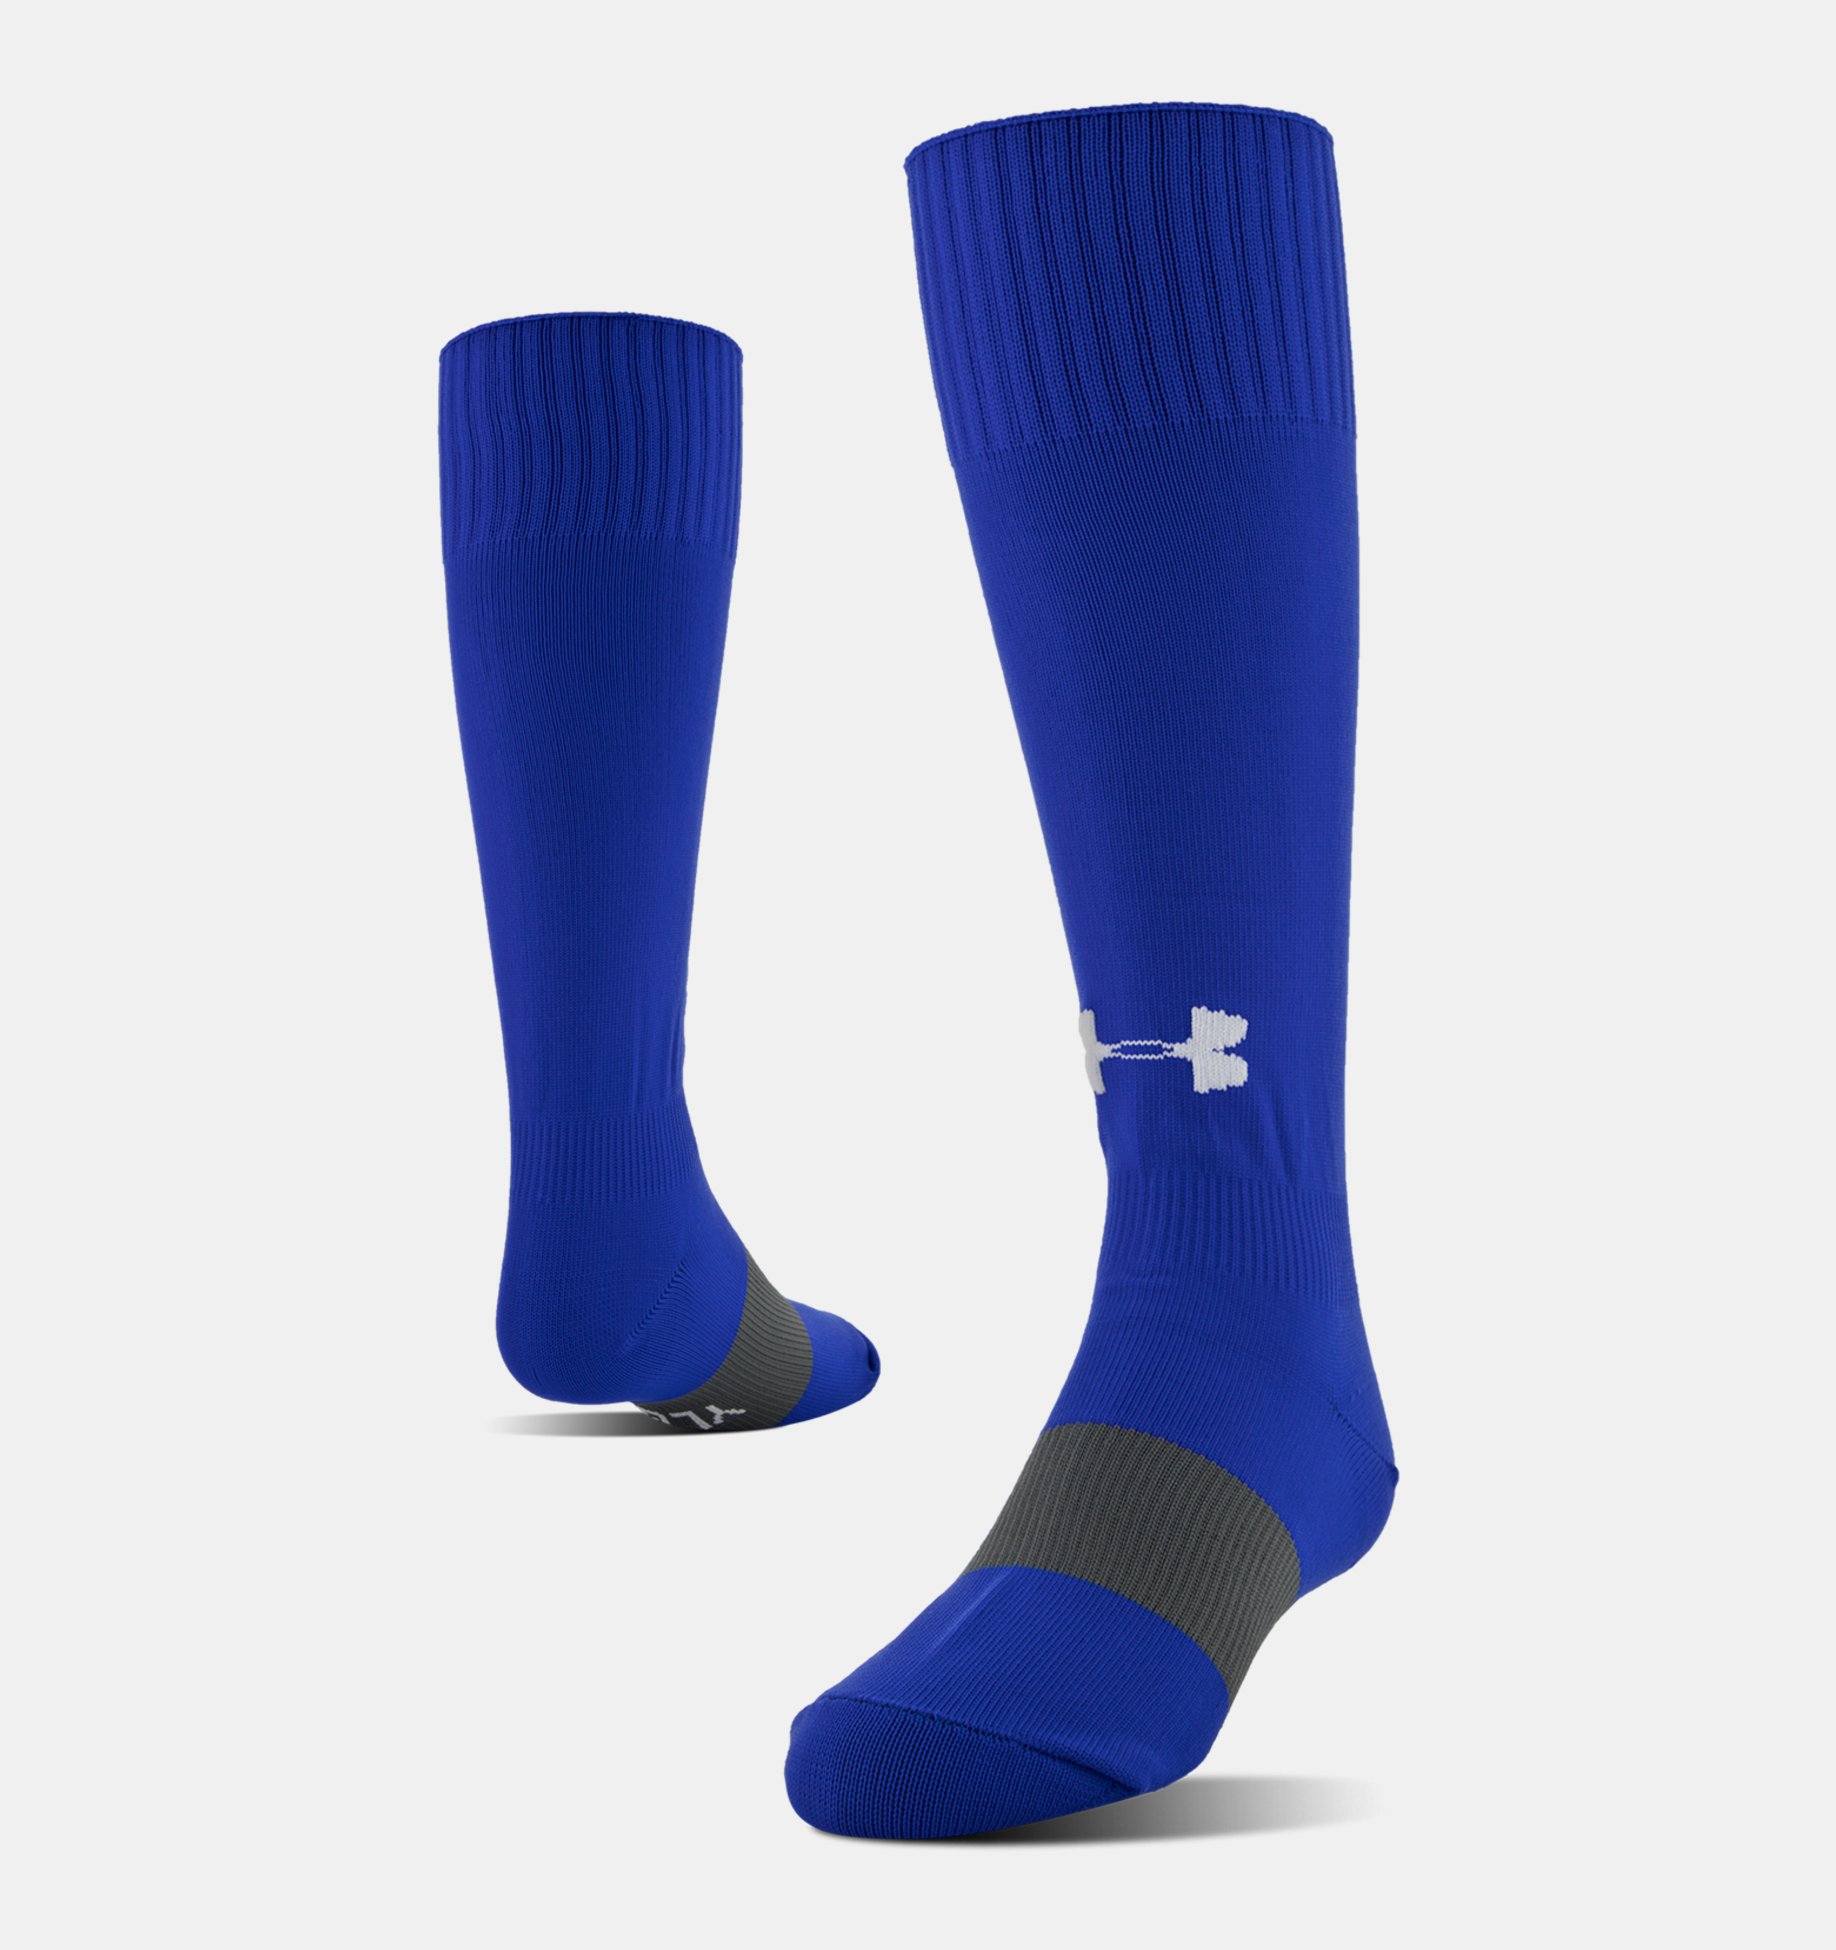 Under Armour Adult Soccer Socks Over-the-calf 3 Pair 2 White 1 Royal Large for sale online 